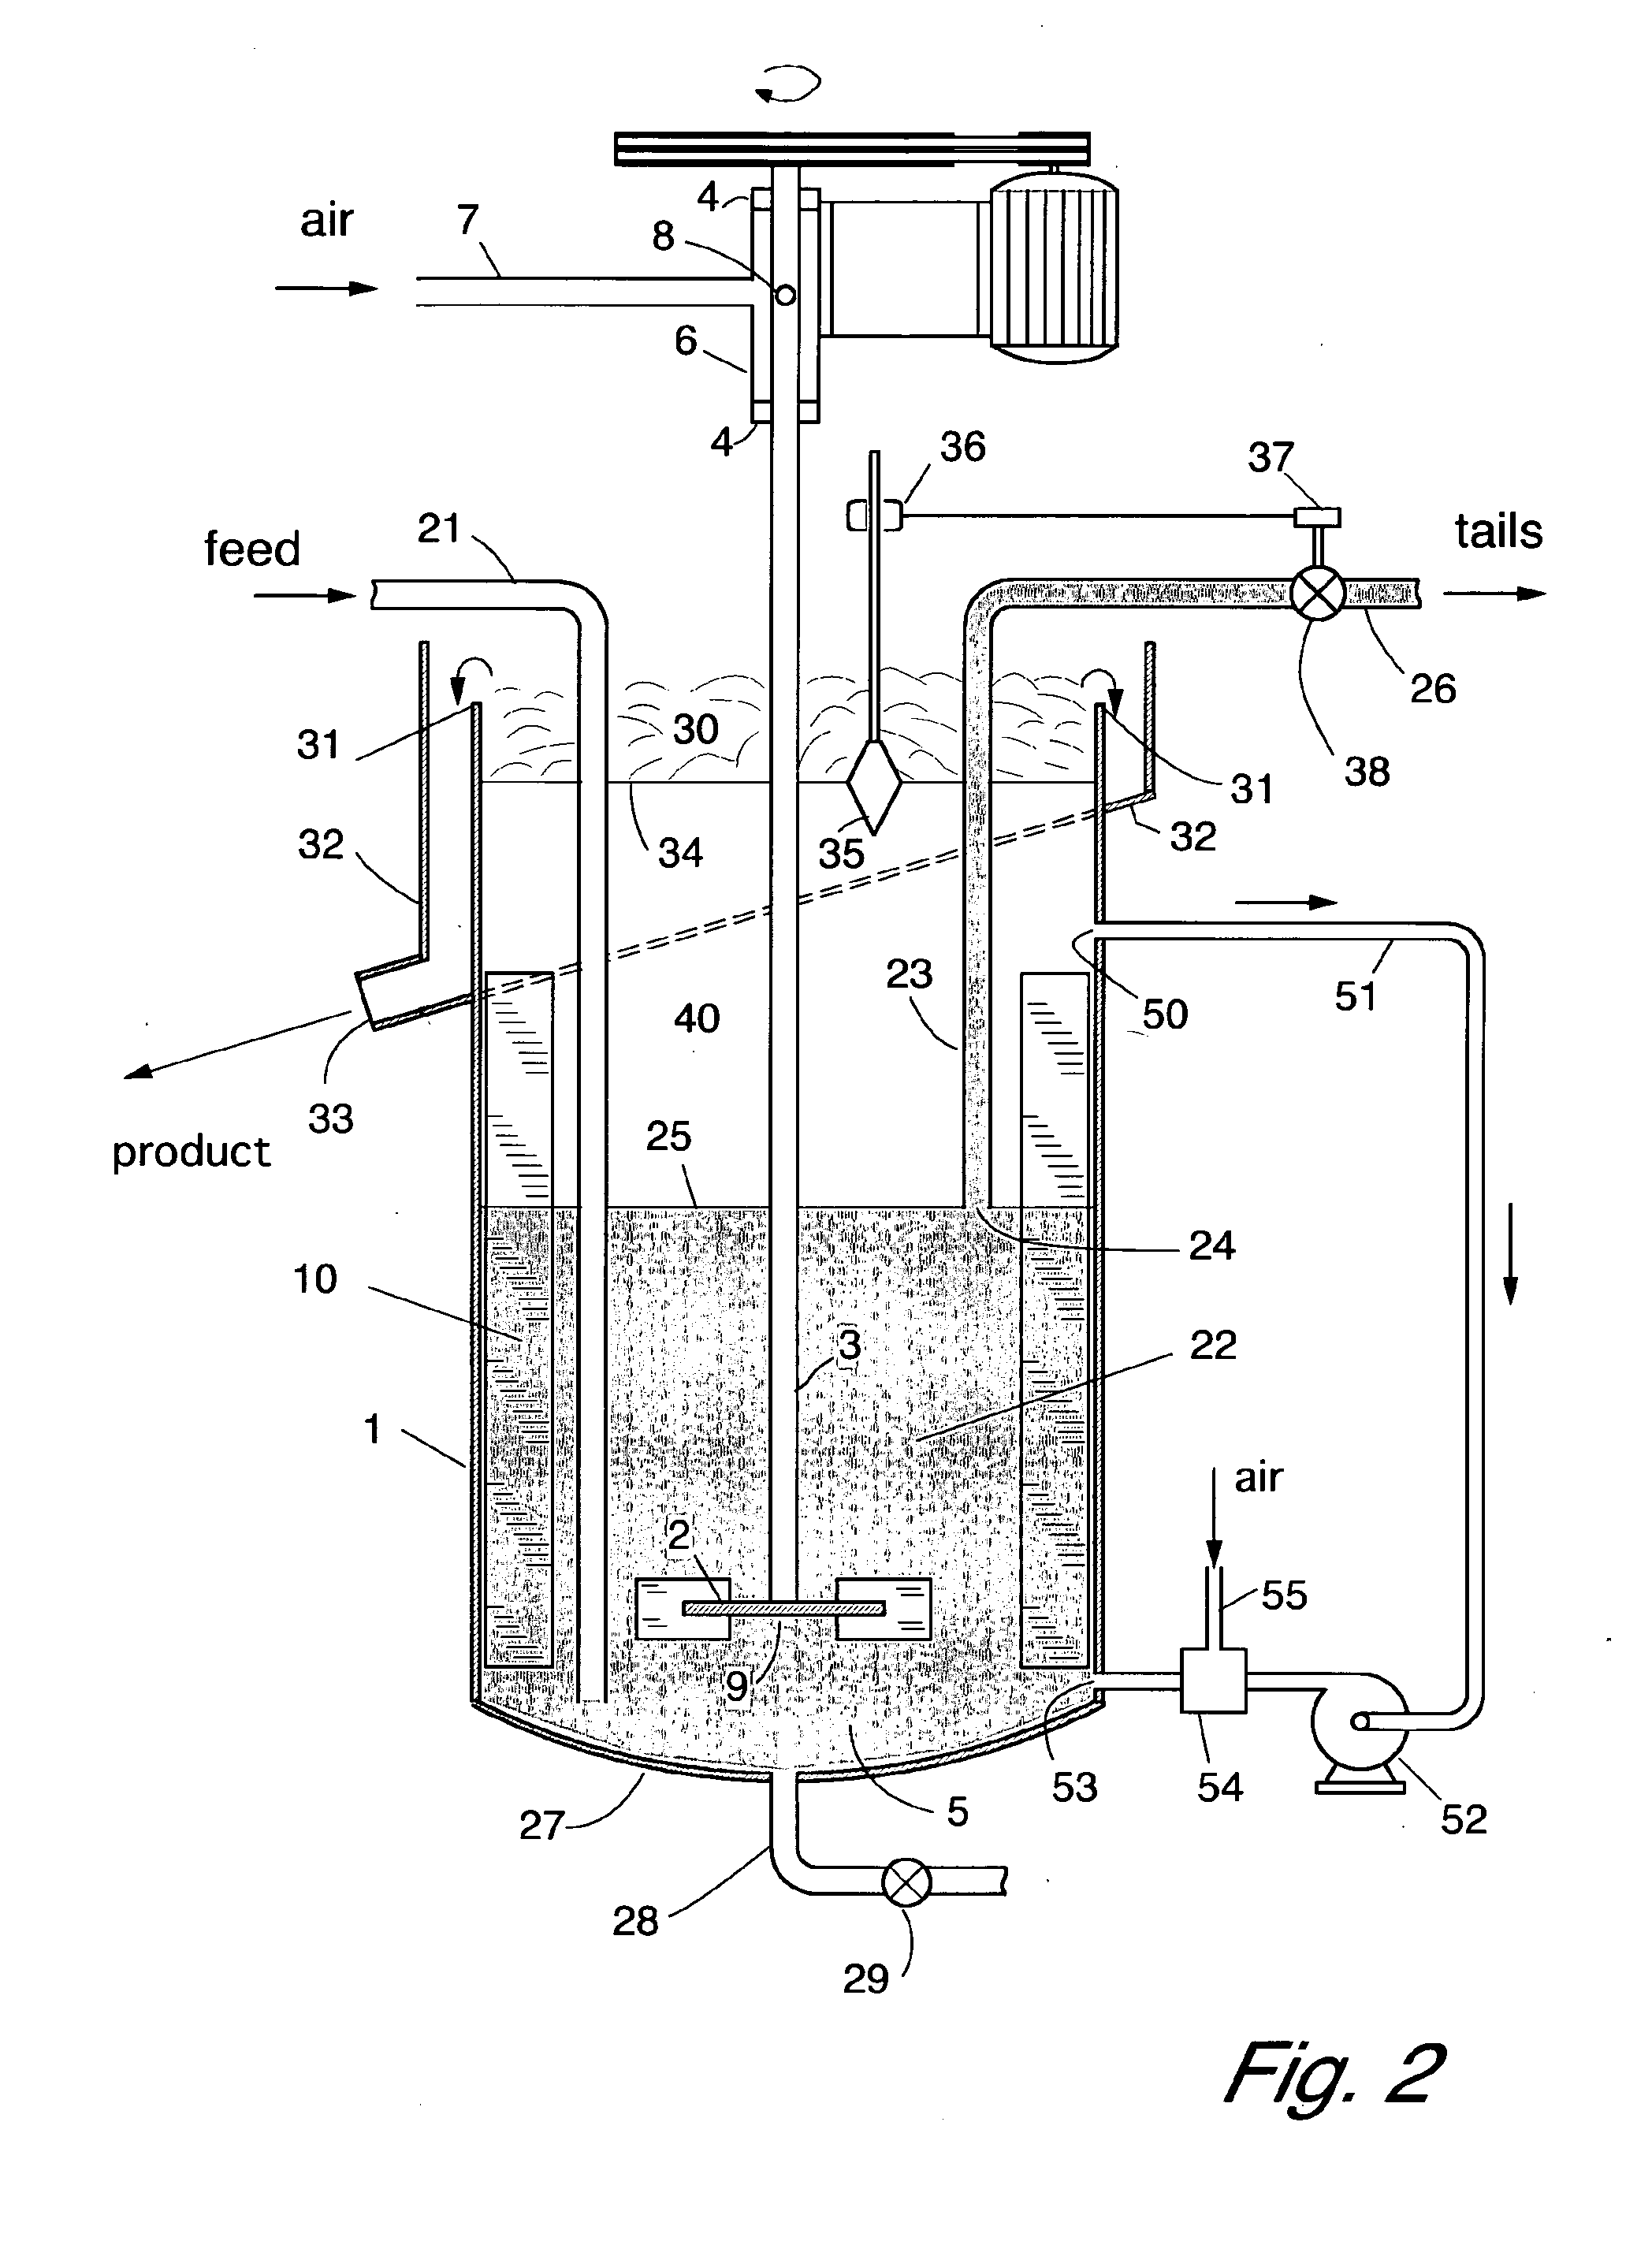 Improved method and apparatus for froth flotation in a vessel with agitation